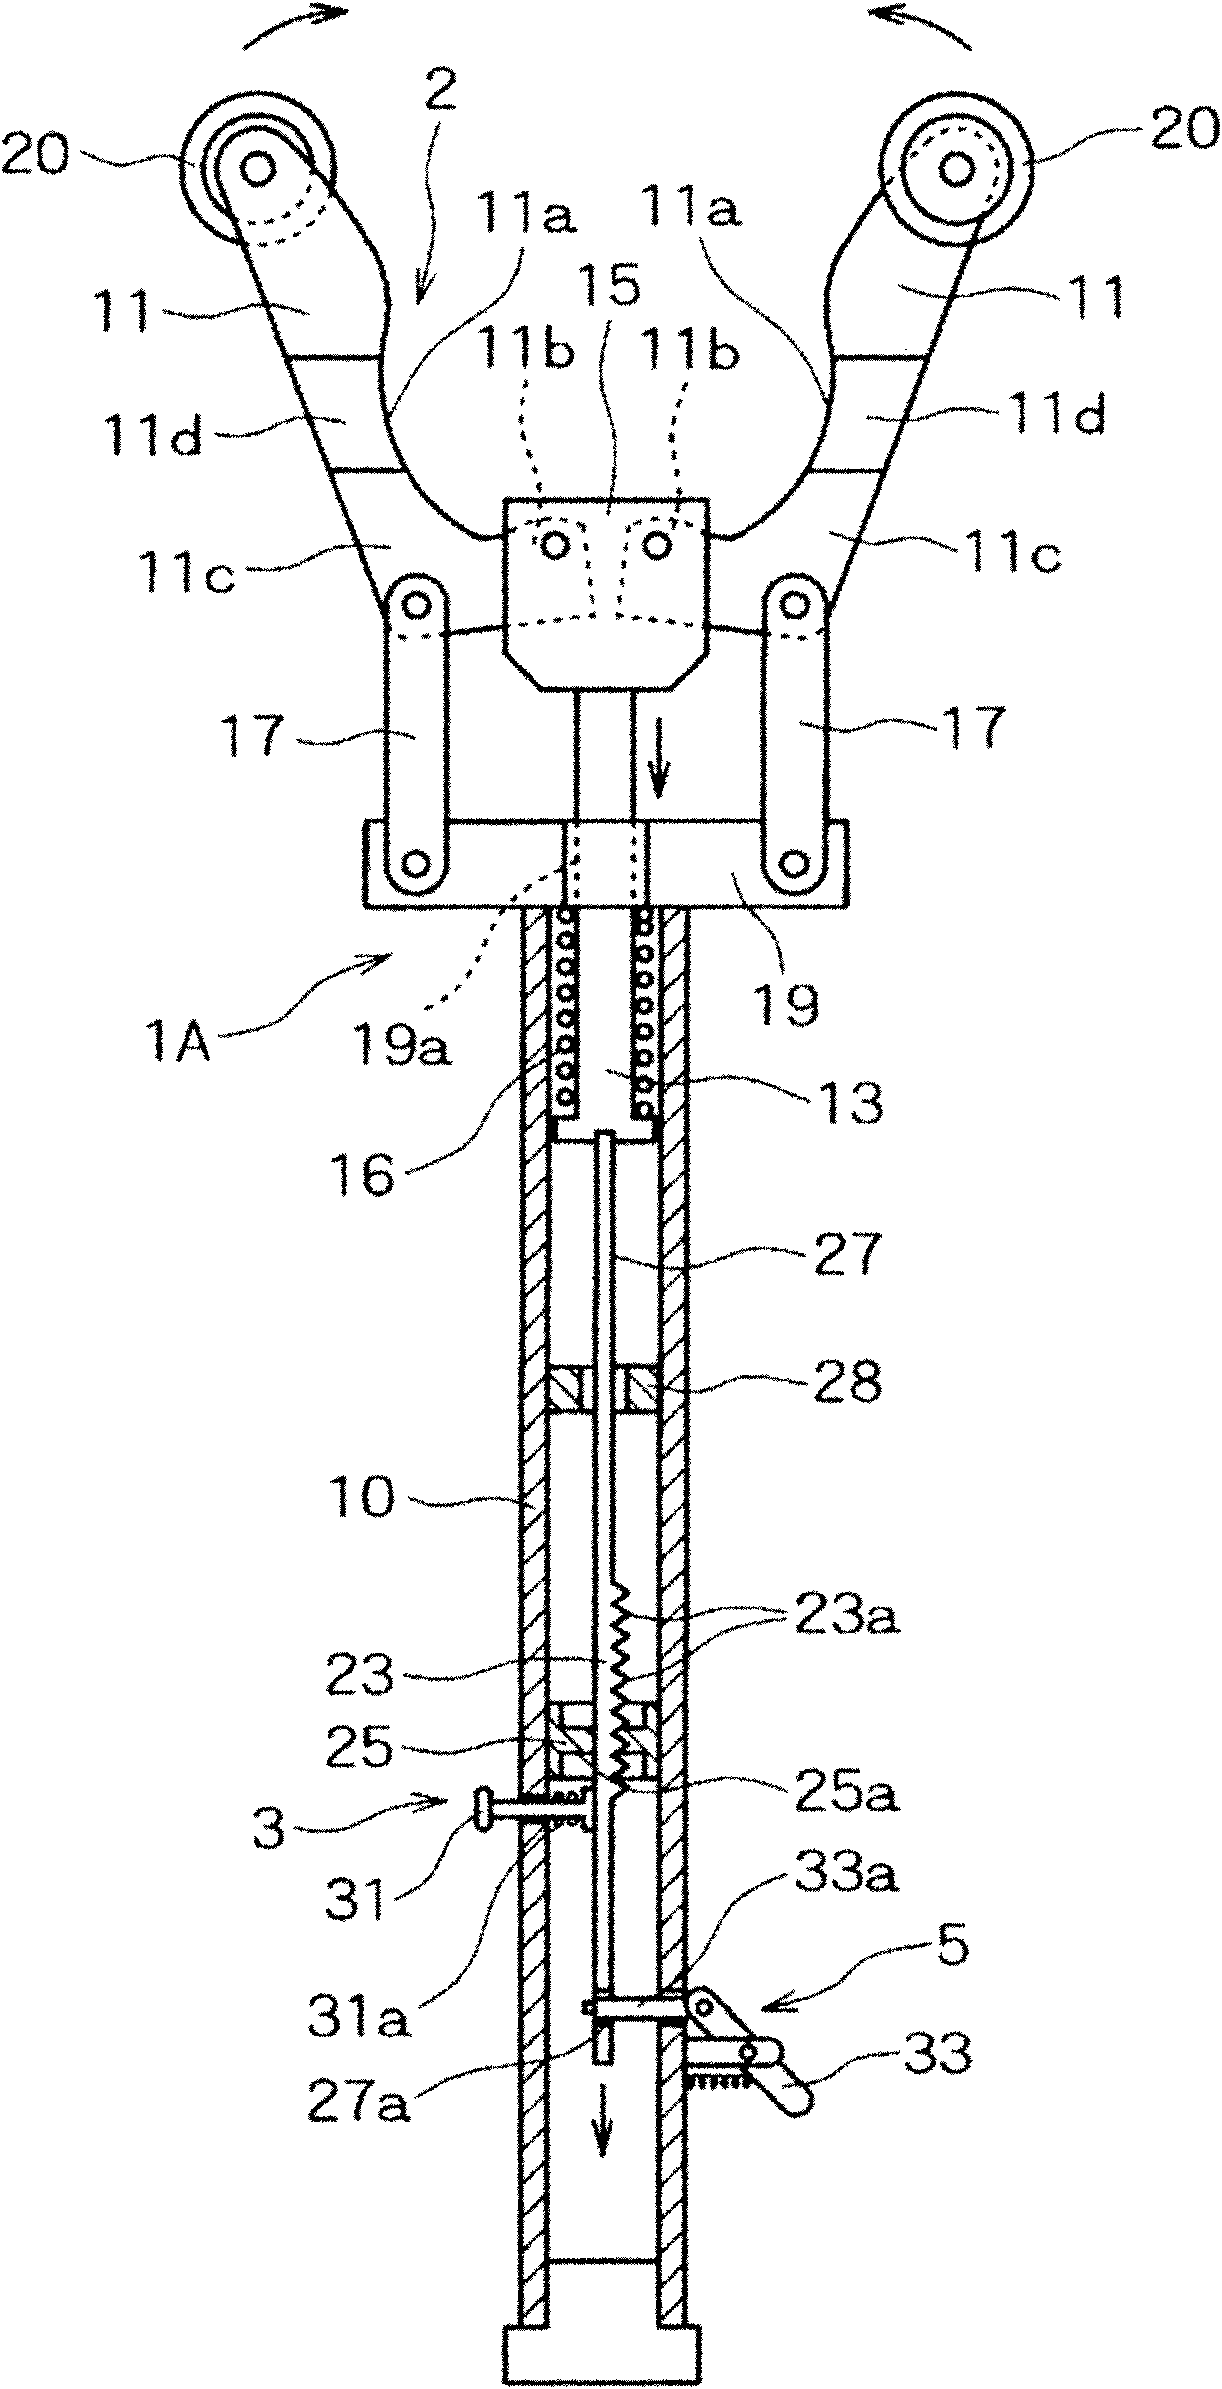 Openable and closable two-pronged body holding device